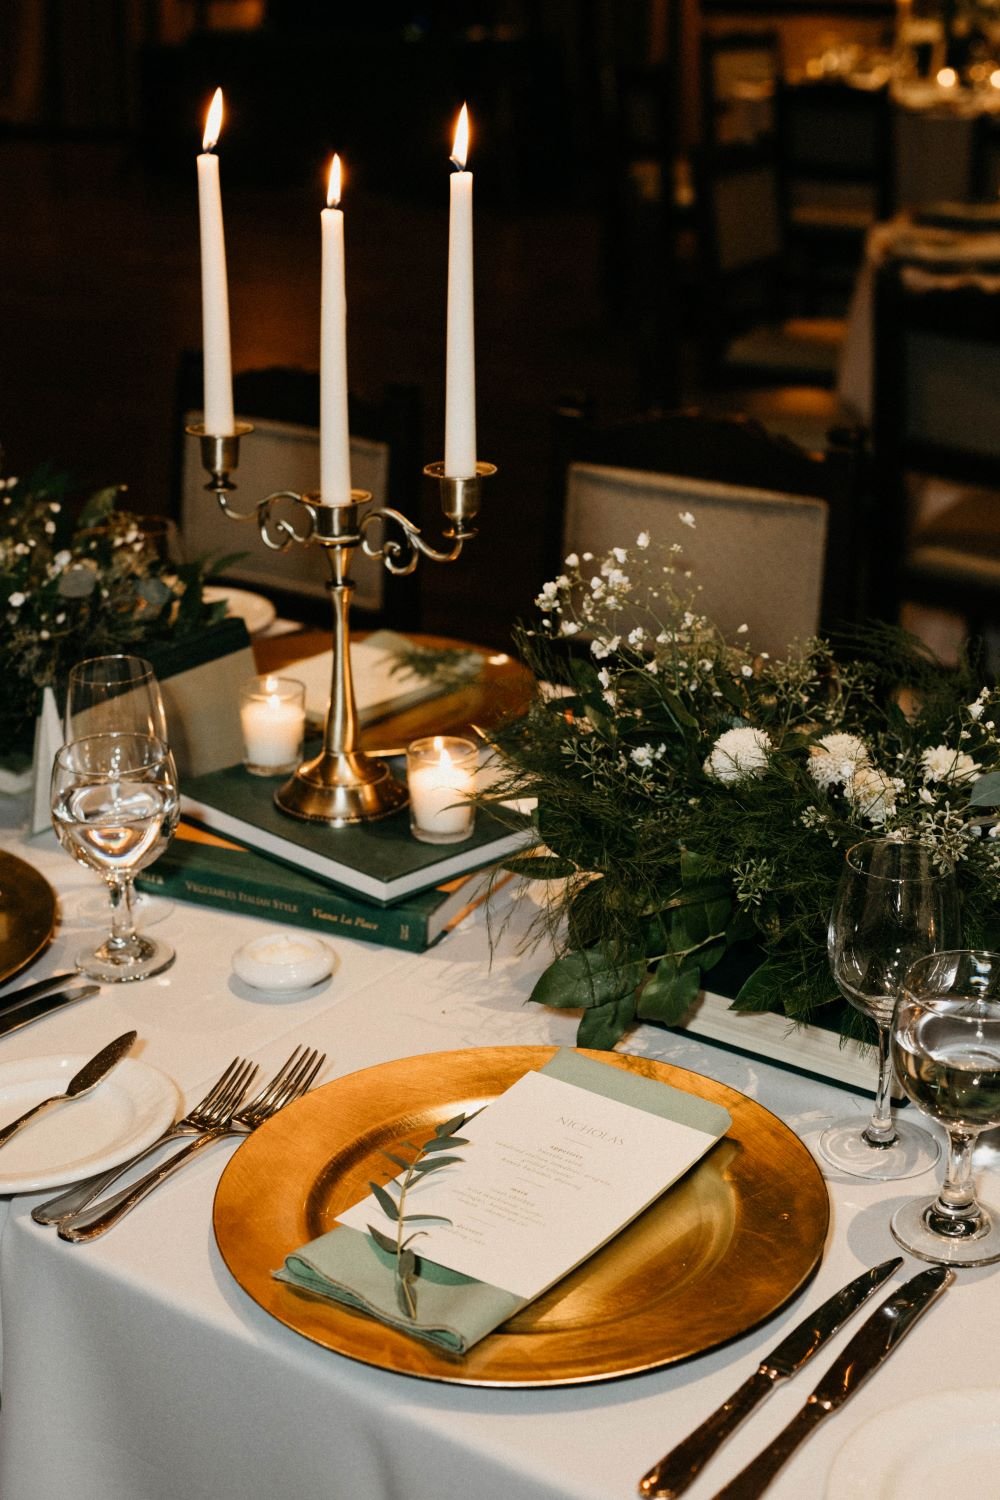 How to give a great wedding rehearsal toast speech, flowers and candles sit on a table adorned with books, a gold plate and personalized menu, let's get rehearsed